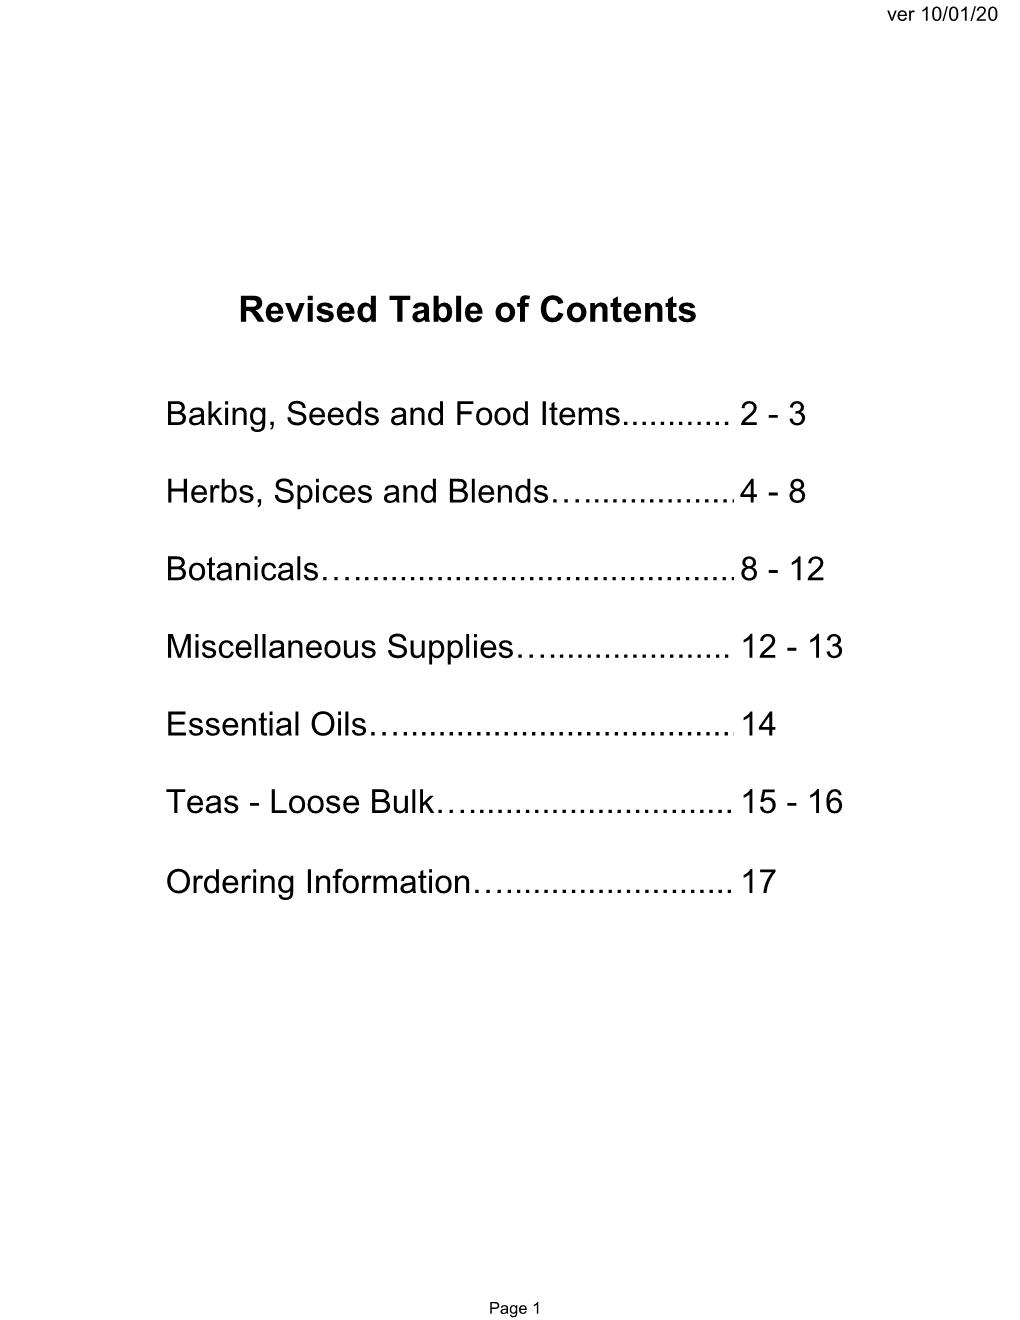 Revised Table of Contents